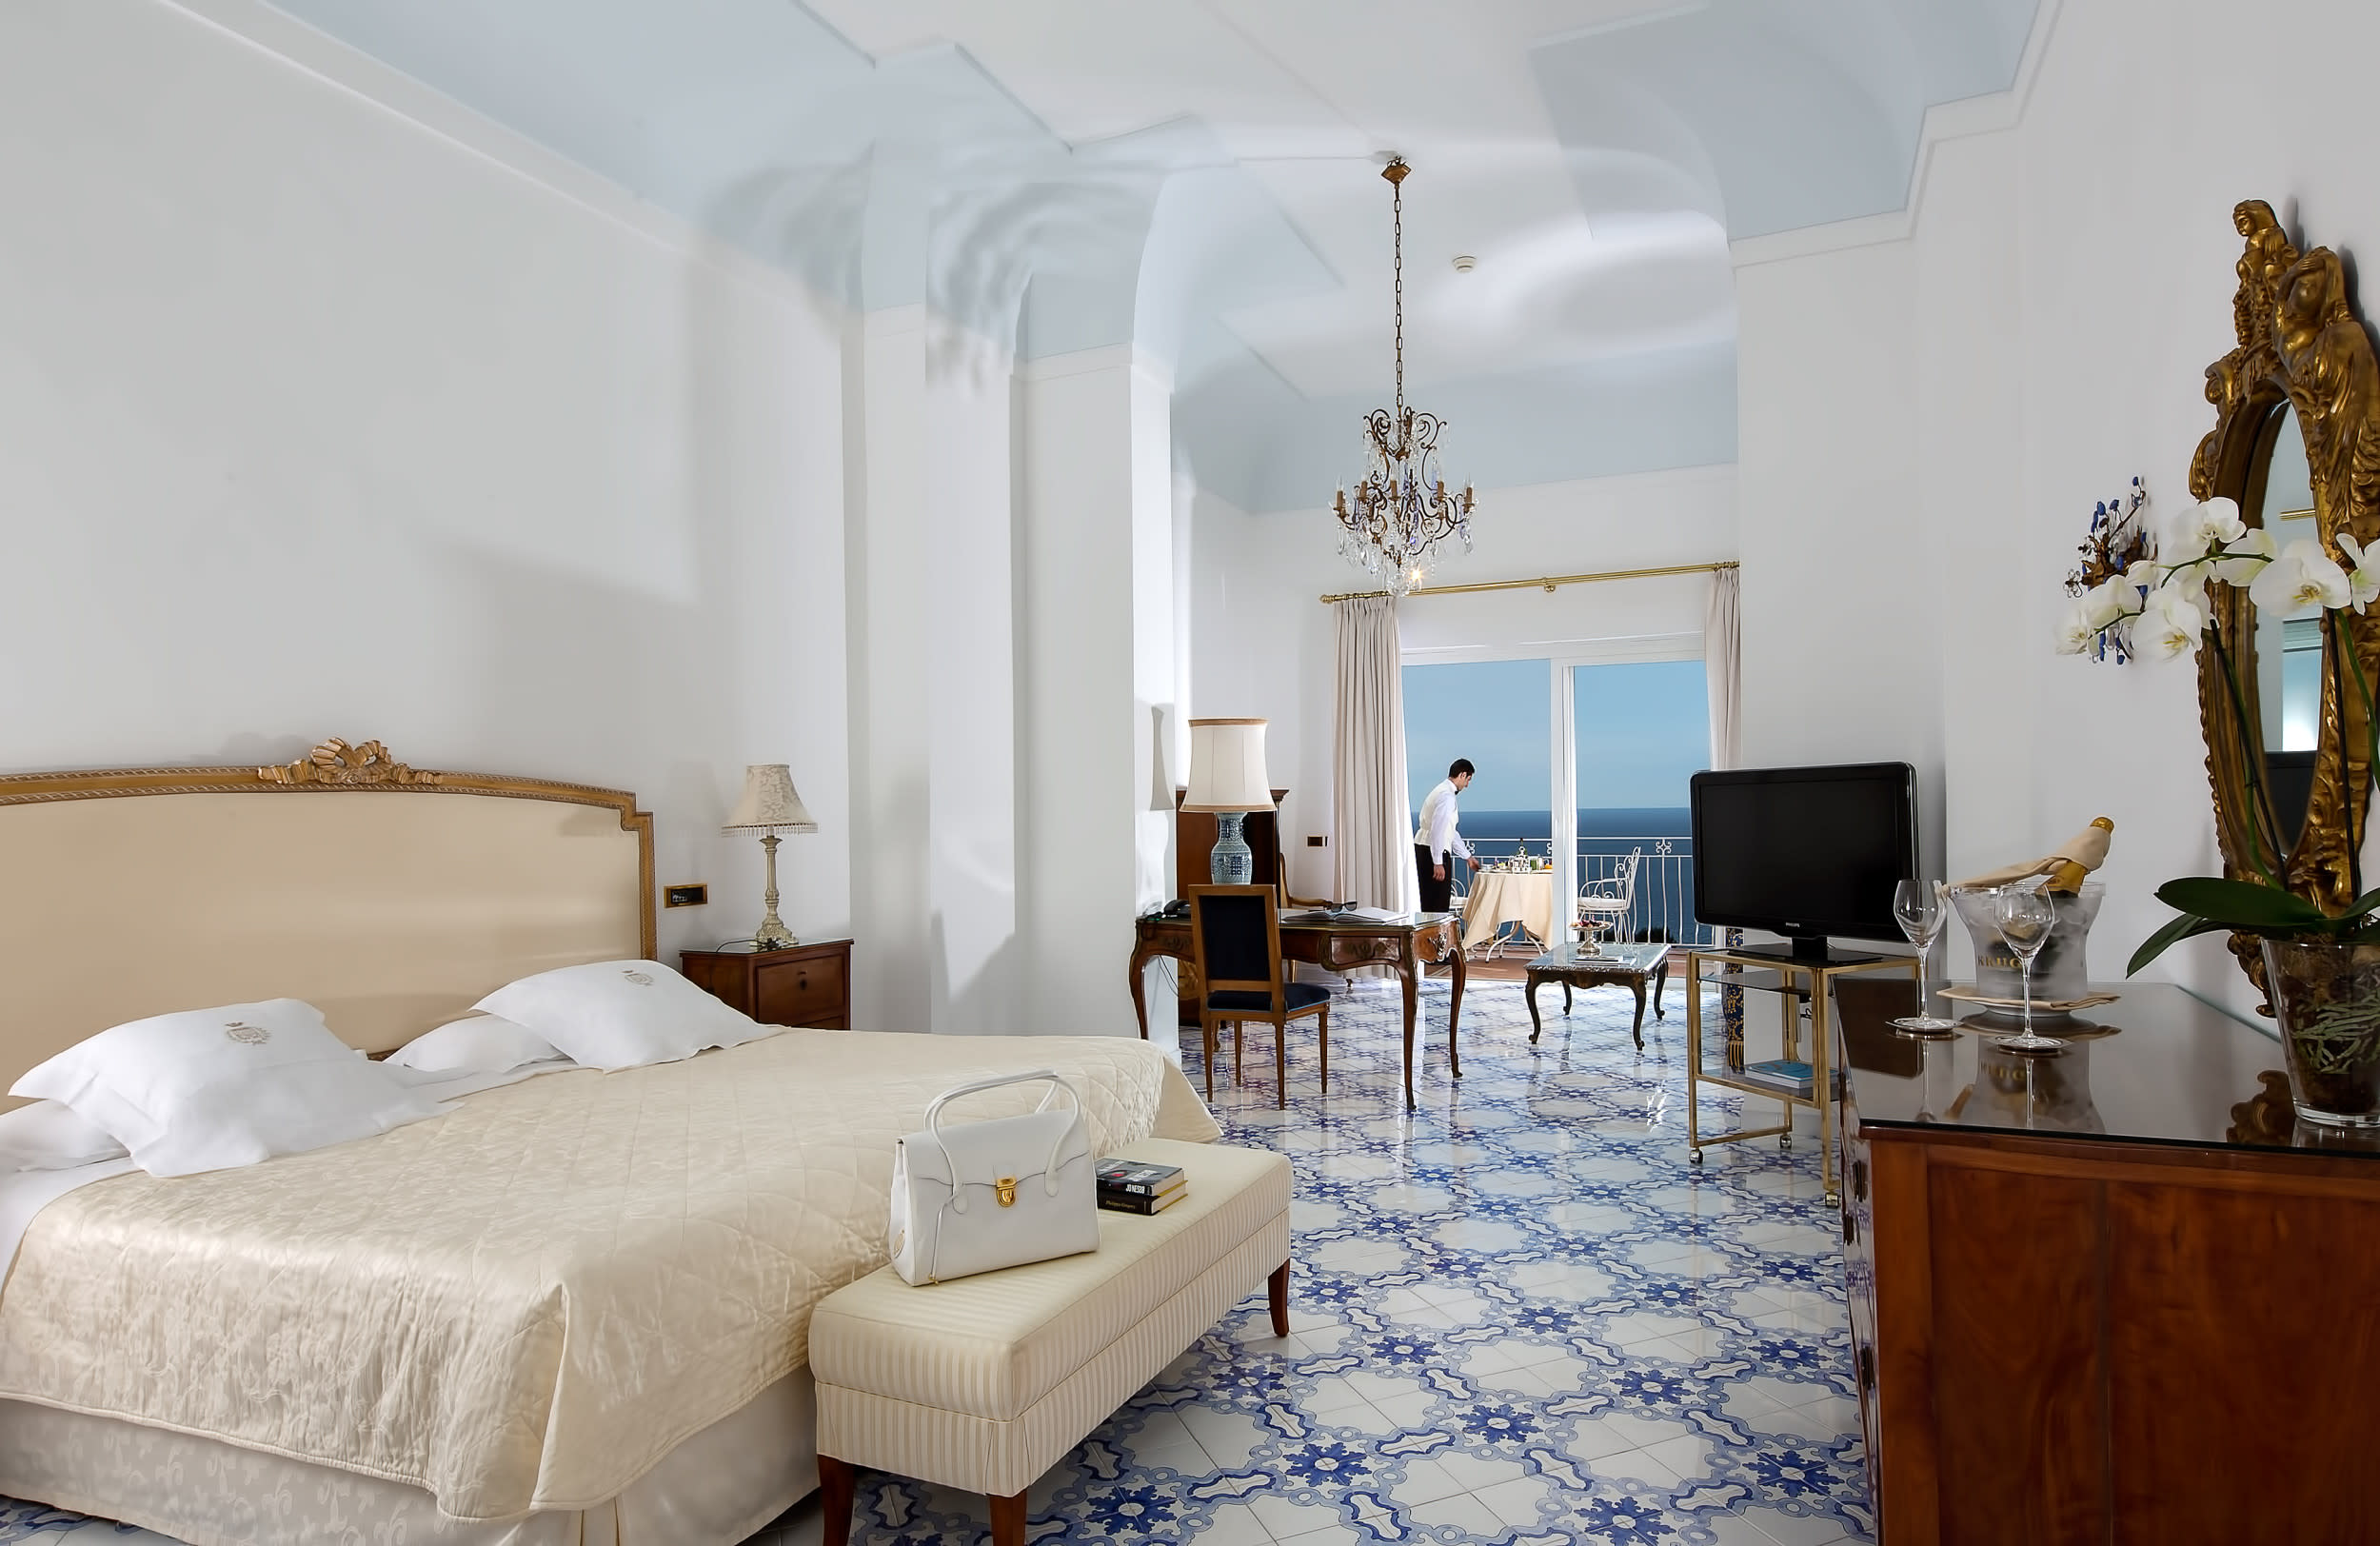 9 Best Hotels in Southern Italy - Grand Hotel Quisisana